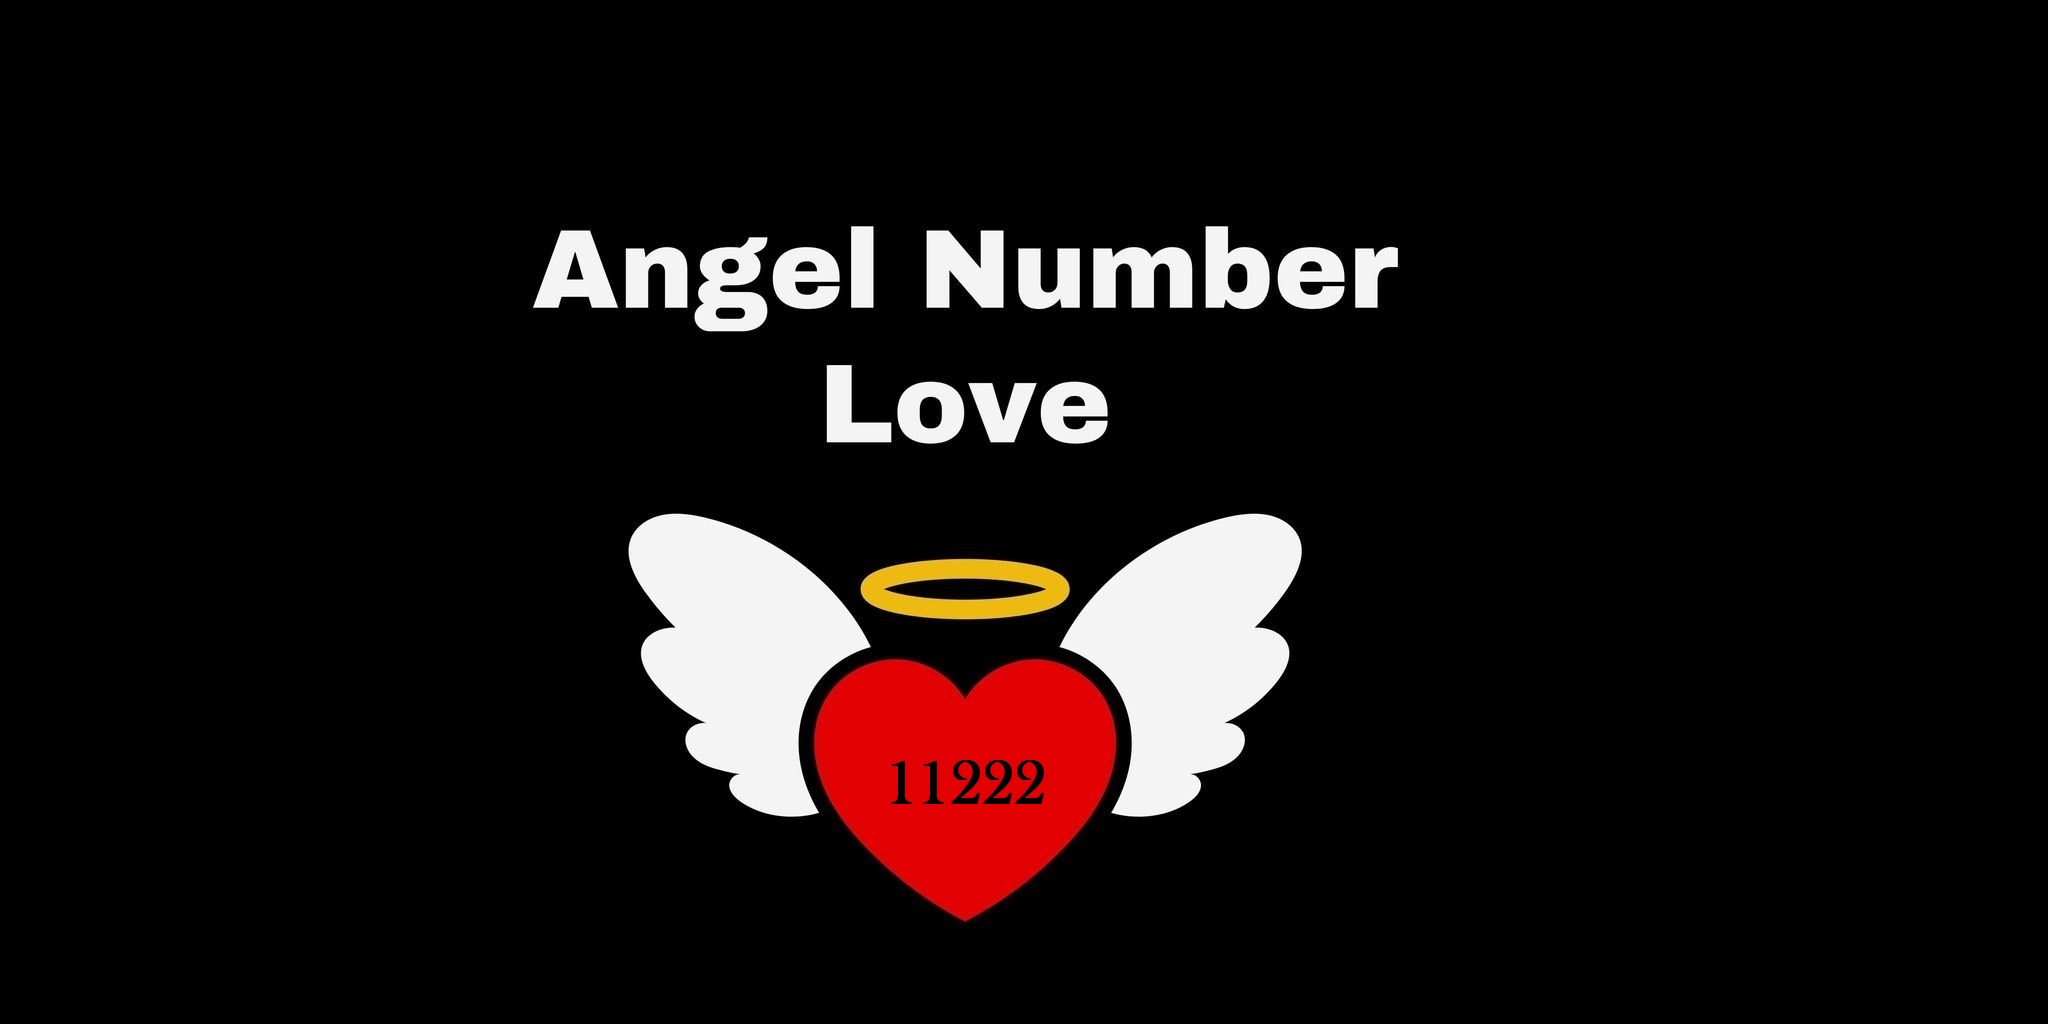 11222 Angel Number Meaning In Love